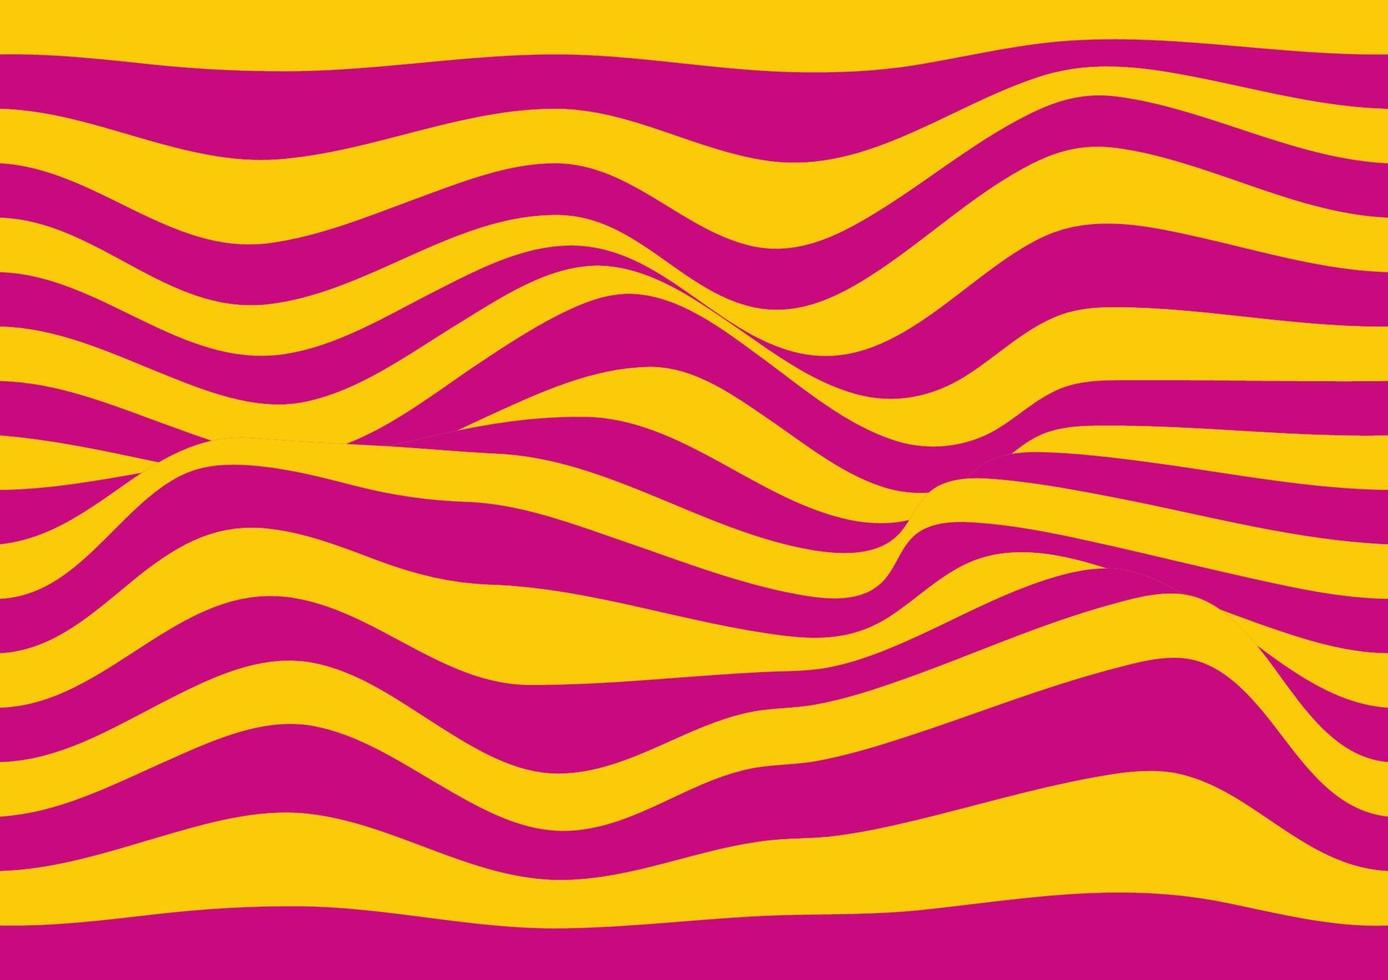 Distorted wavy lines abstract background vector illustration, curve It has a pink and orange straight line pattern.